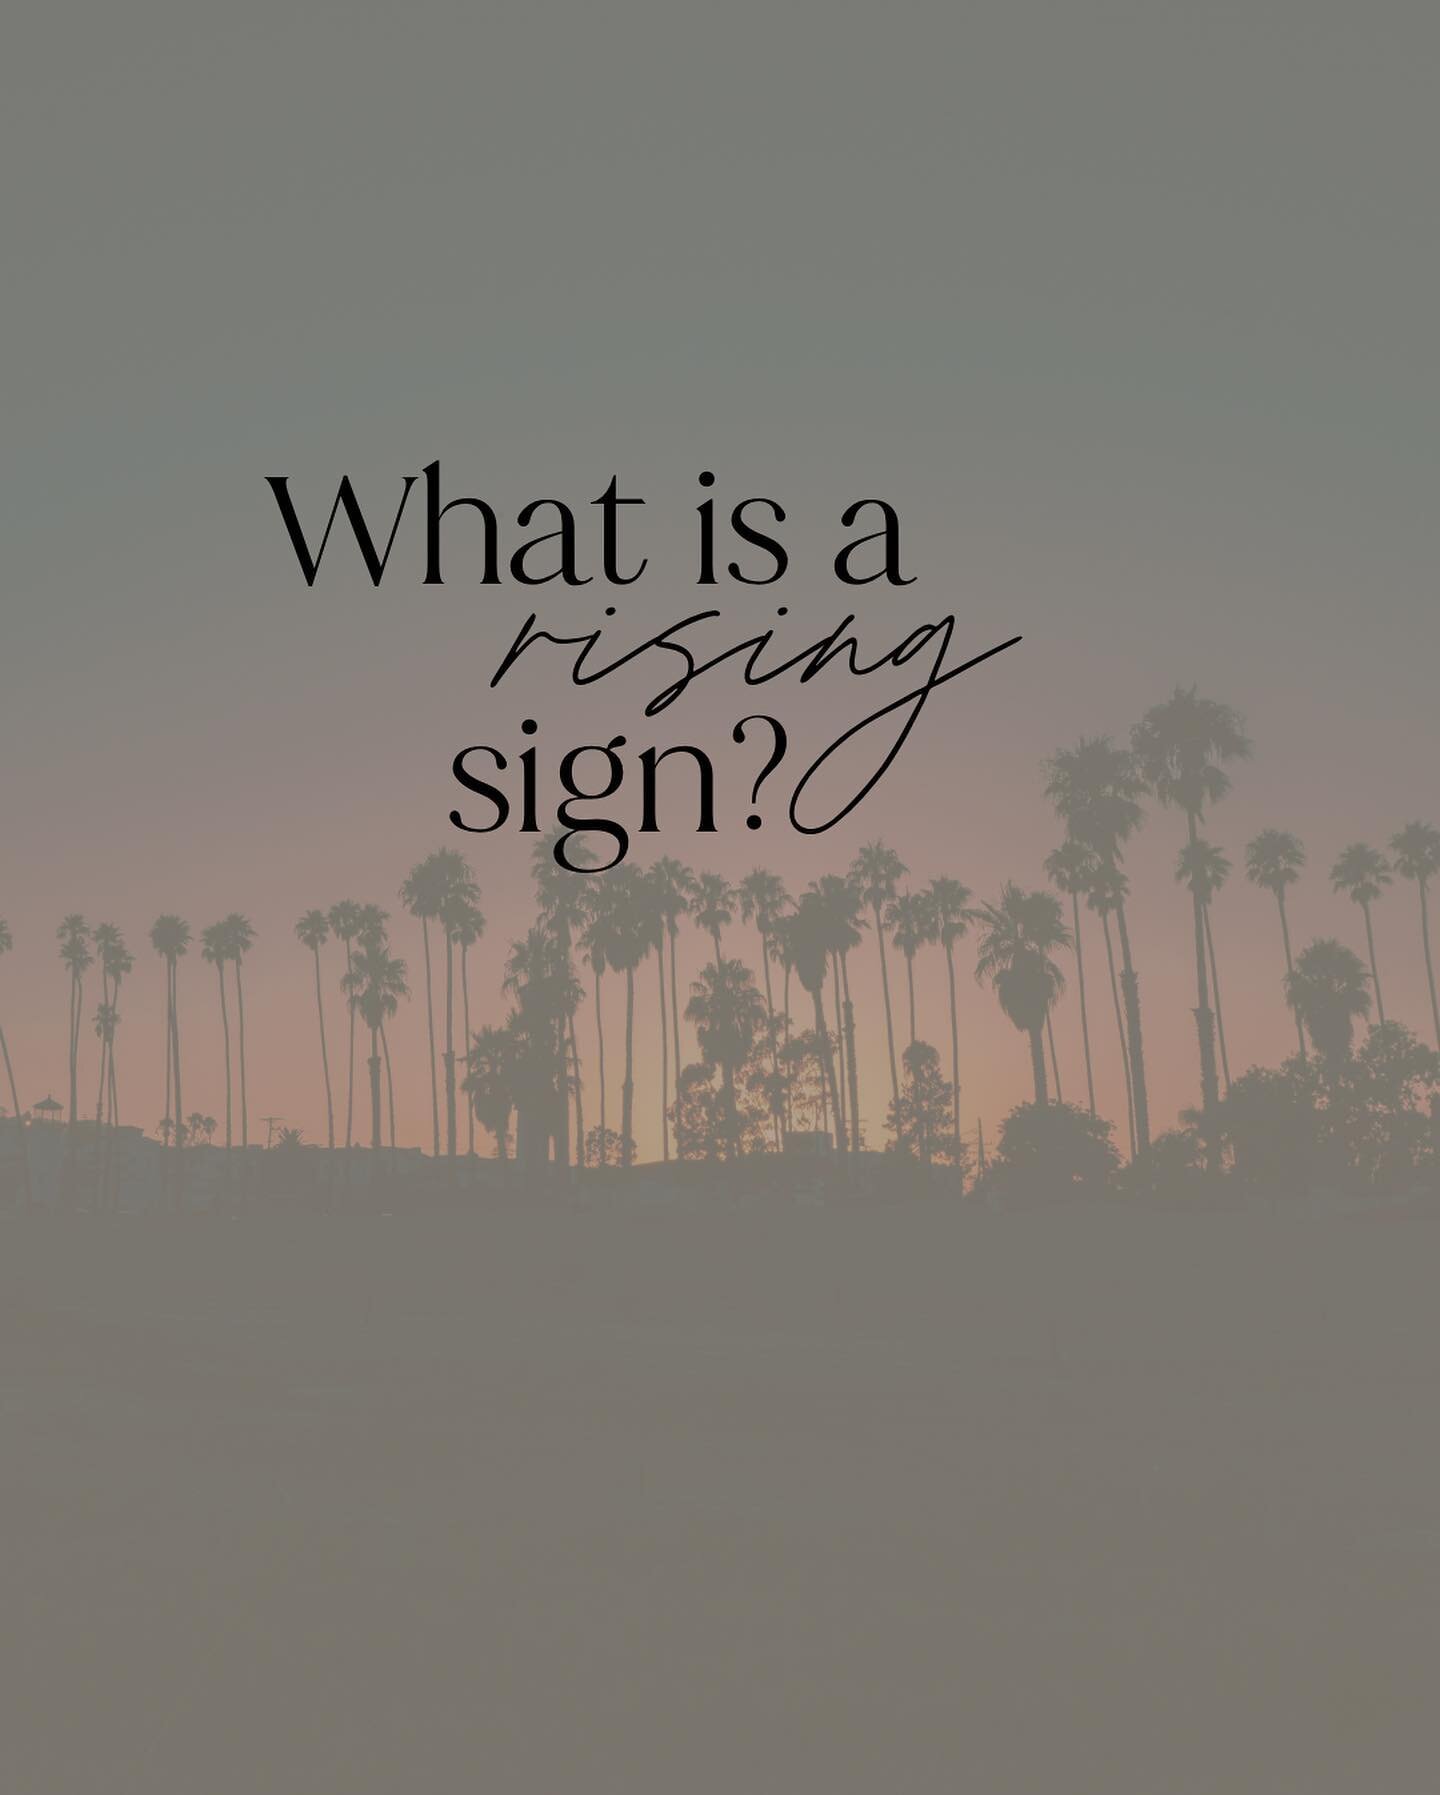 Your rising sign is an important part of understanding your astrology chart, it&rsquo;s actually one of the core and significant parts.

It makes up one of the &ldquo;Big 3&rdquo; astrologers ask about &mdash; Rising sign, Sun sign, and Moon sign. 

